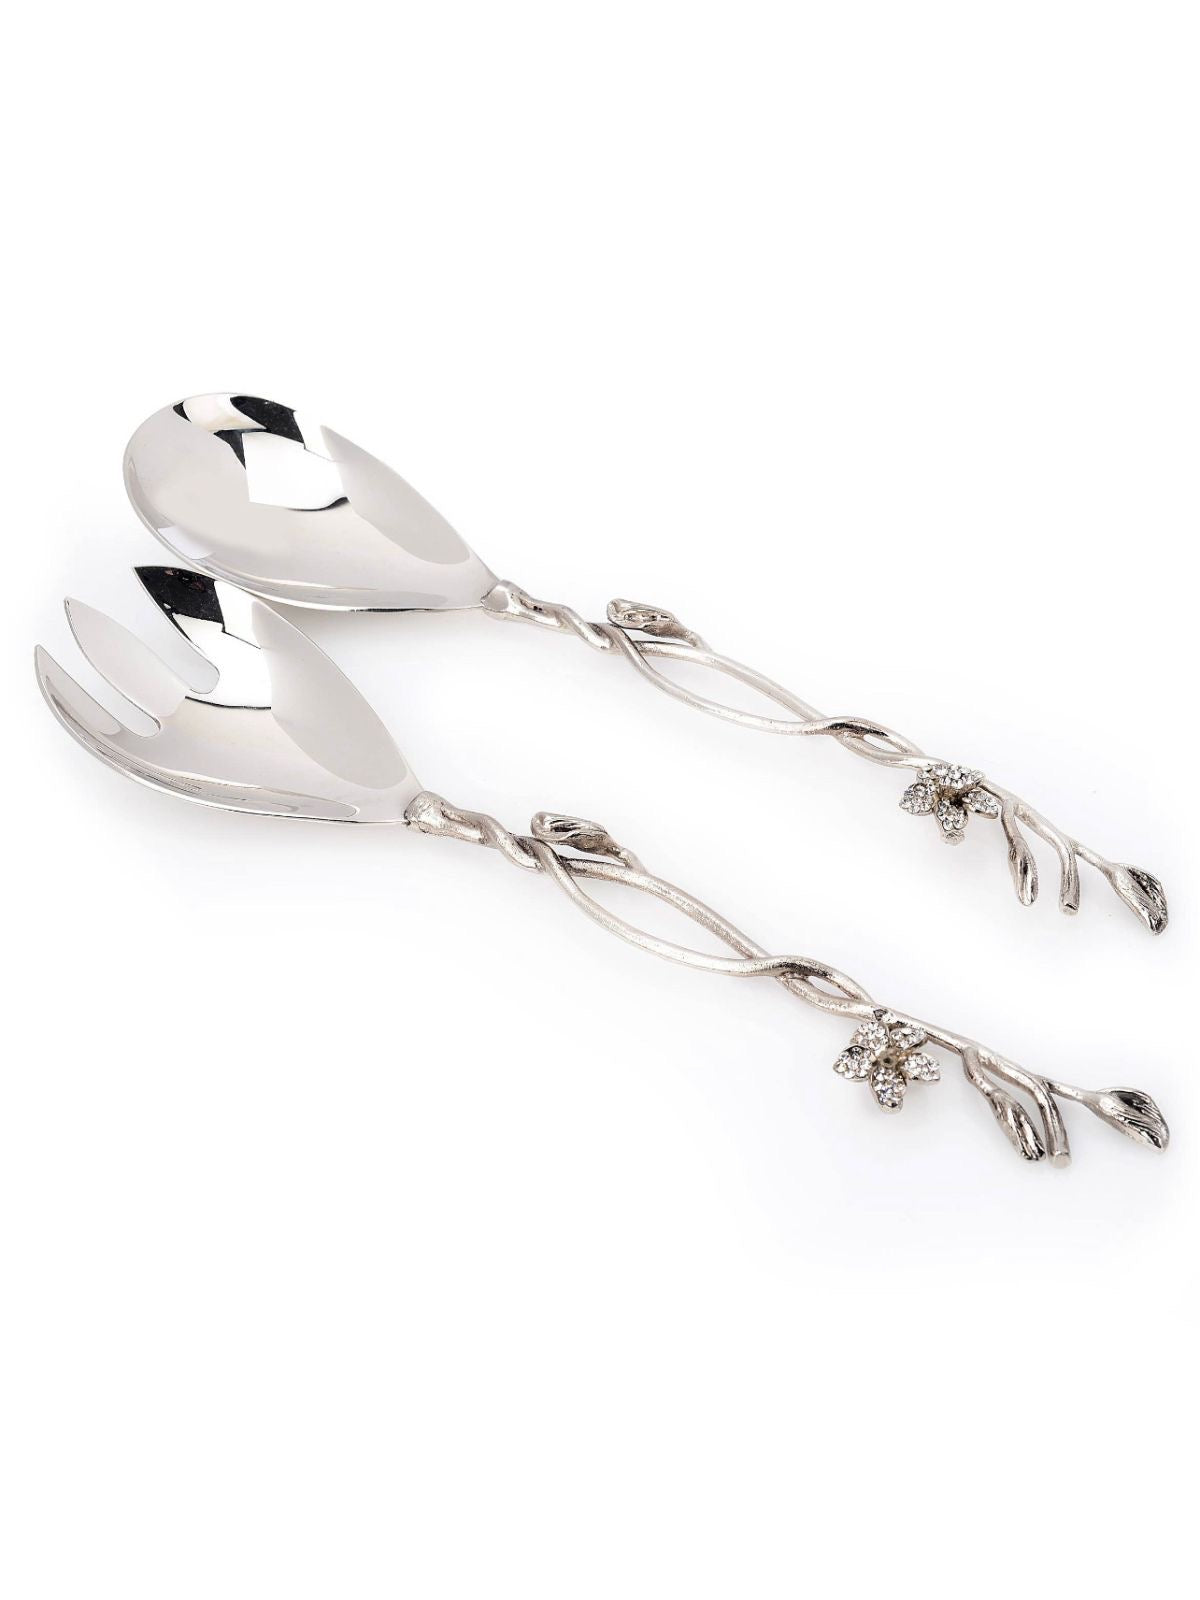 Add elegance to your serving decor with this hand-crafted salad server set featuring a hammered stainless steel design with an exquisite jeweled flower embellishment, a truly masterpiece that’s available at KYA Home Decor 